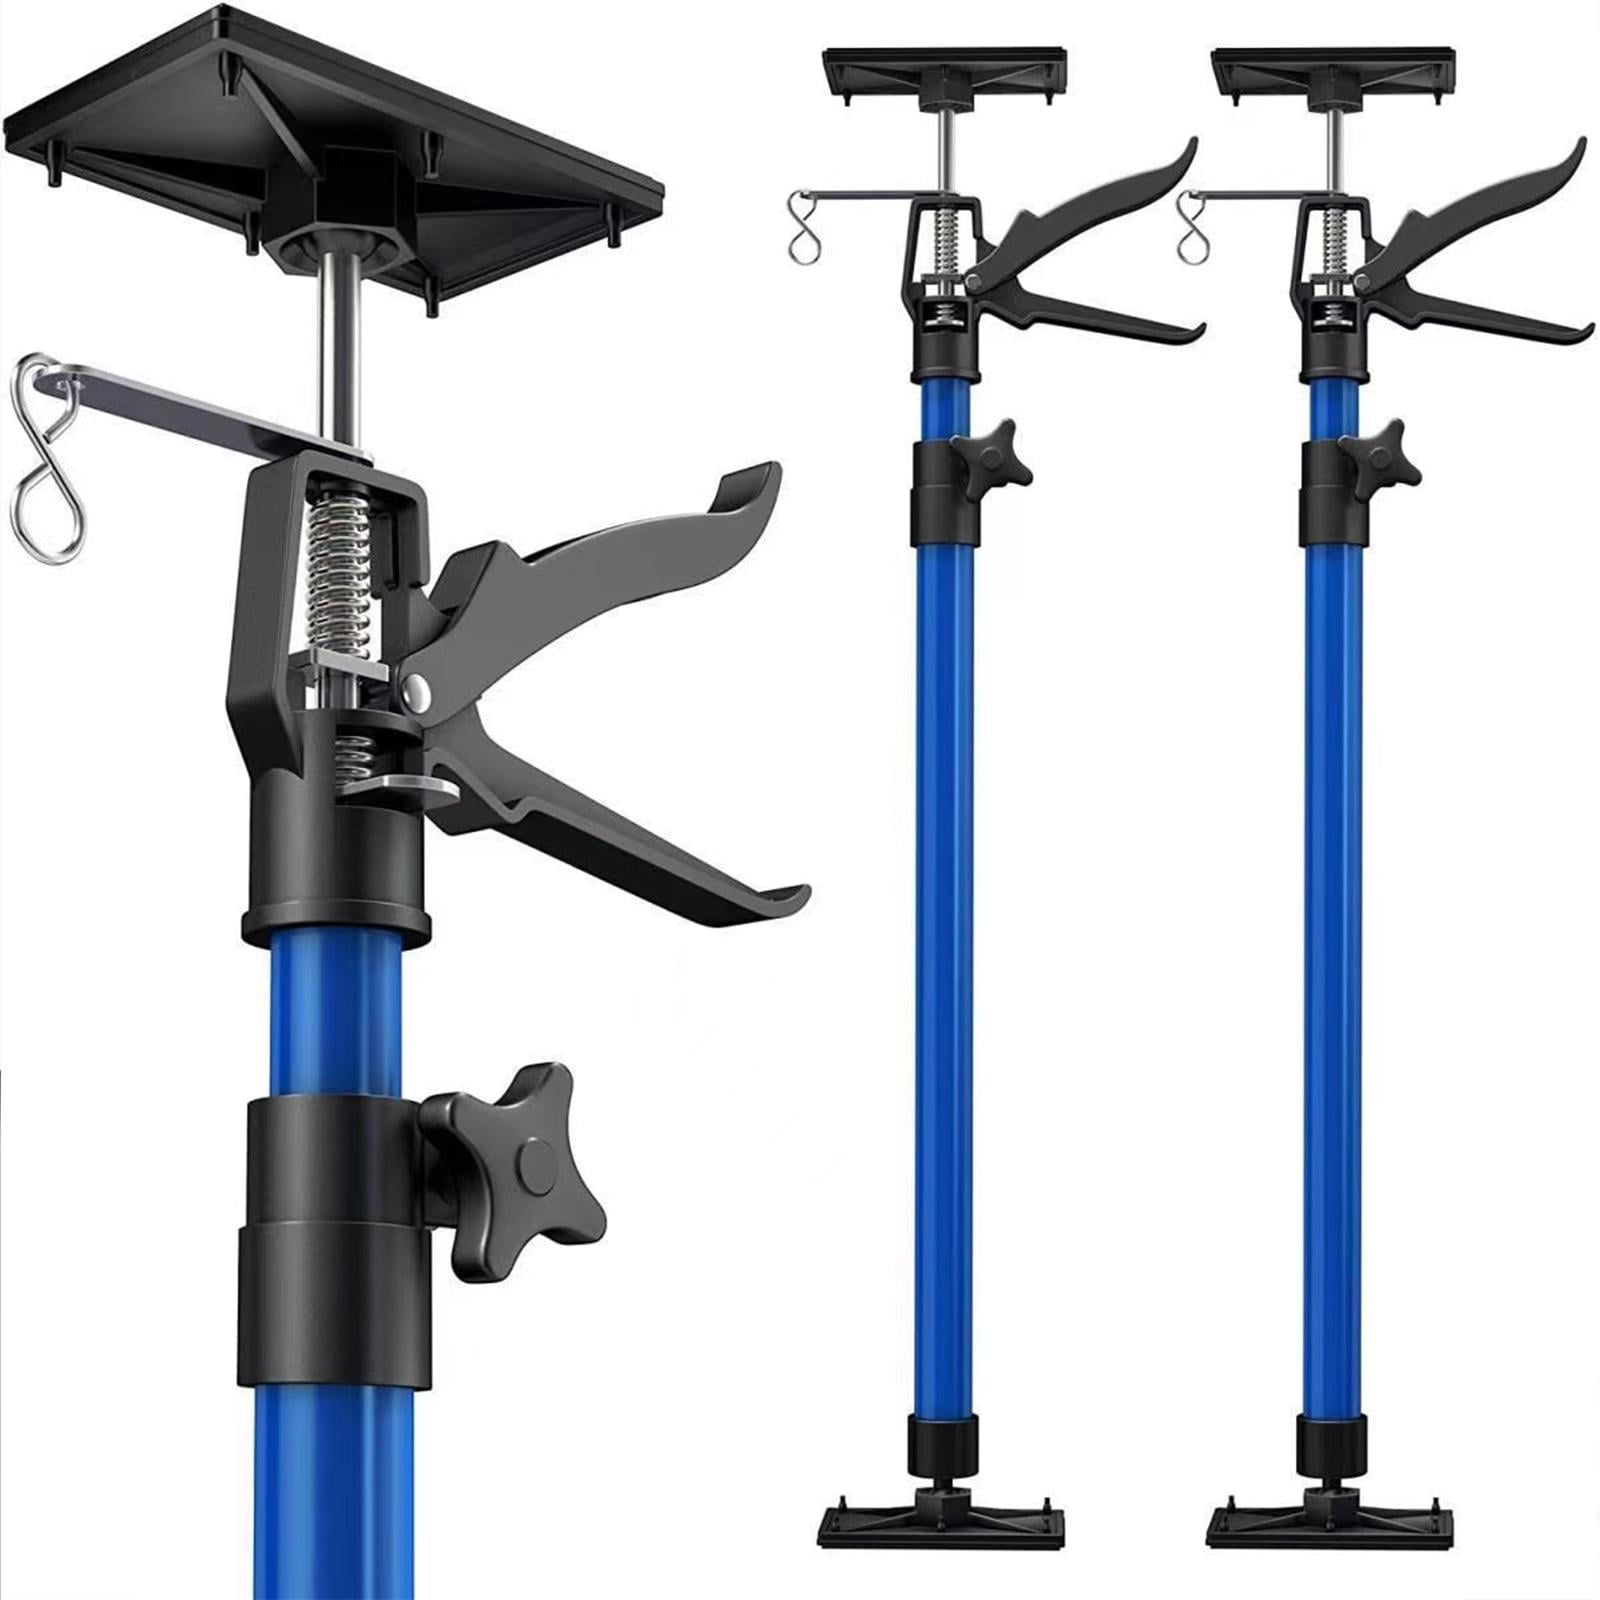 MANQO Cabinet Jack for Installing Cabinet Support Pole 3rd Hand Support  System Adjustable Support Rod,Extend from 19.29 inch to 43.30 inch,Supports  up